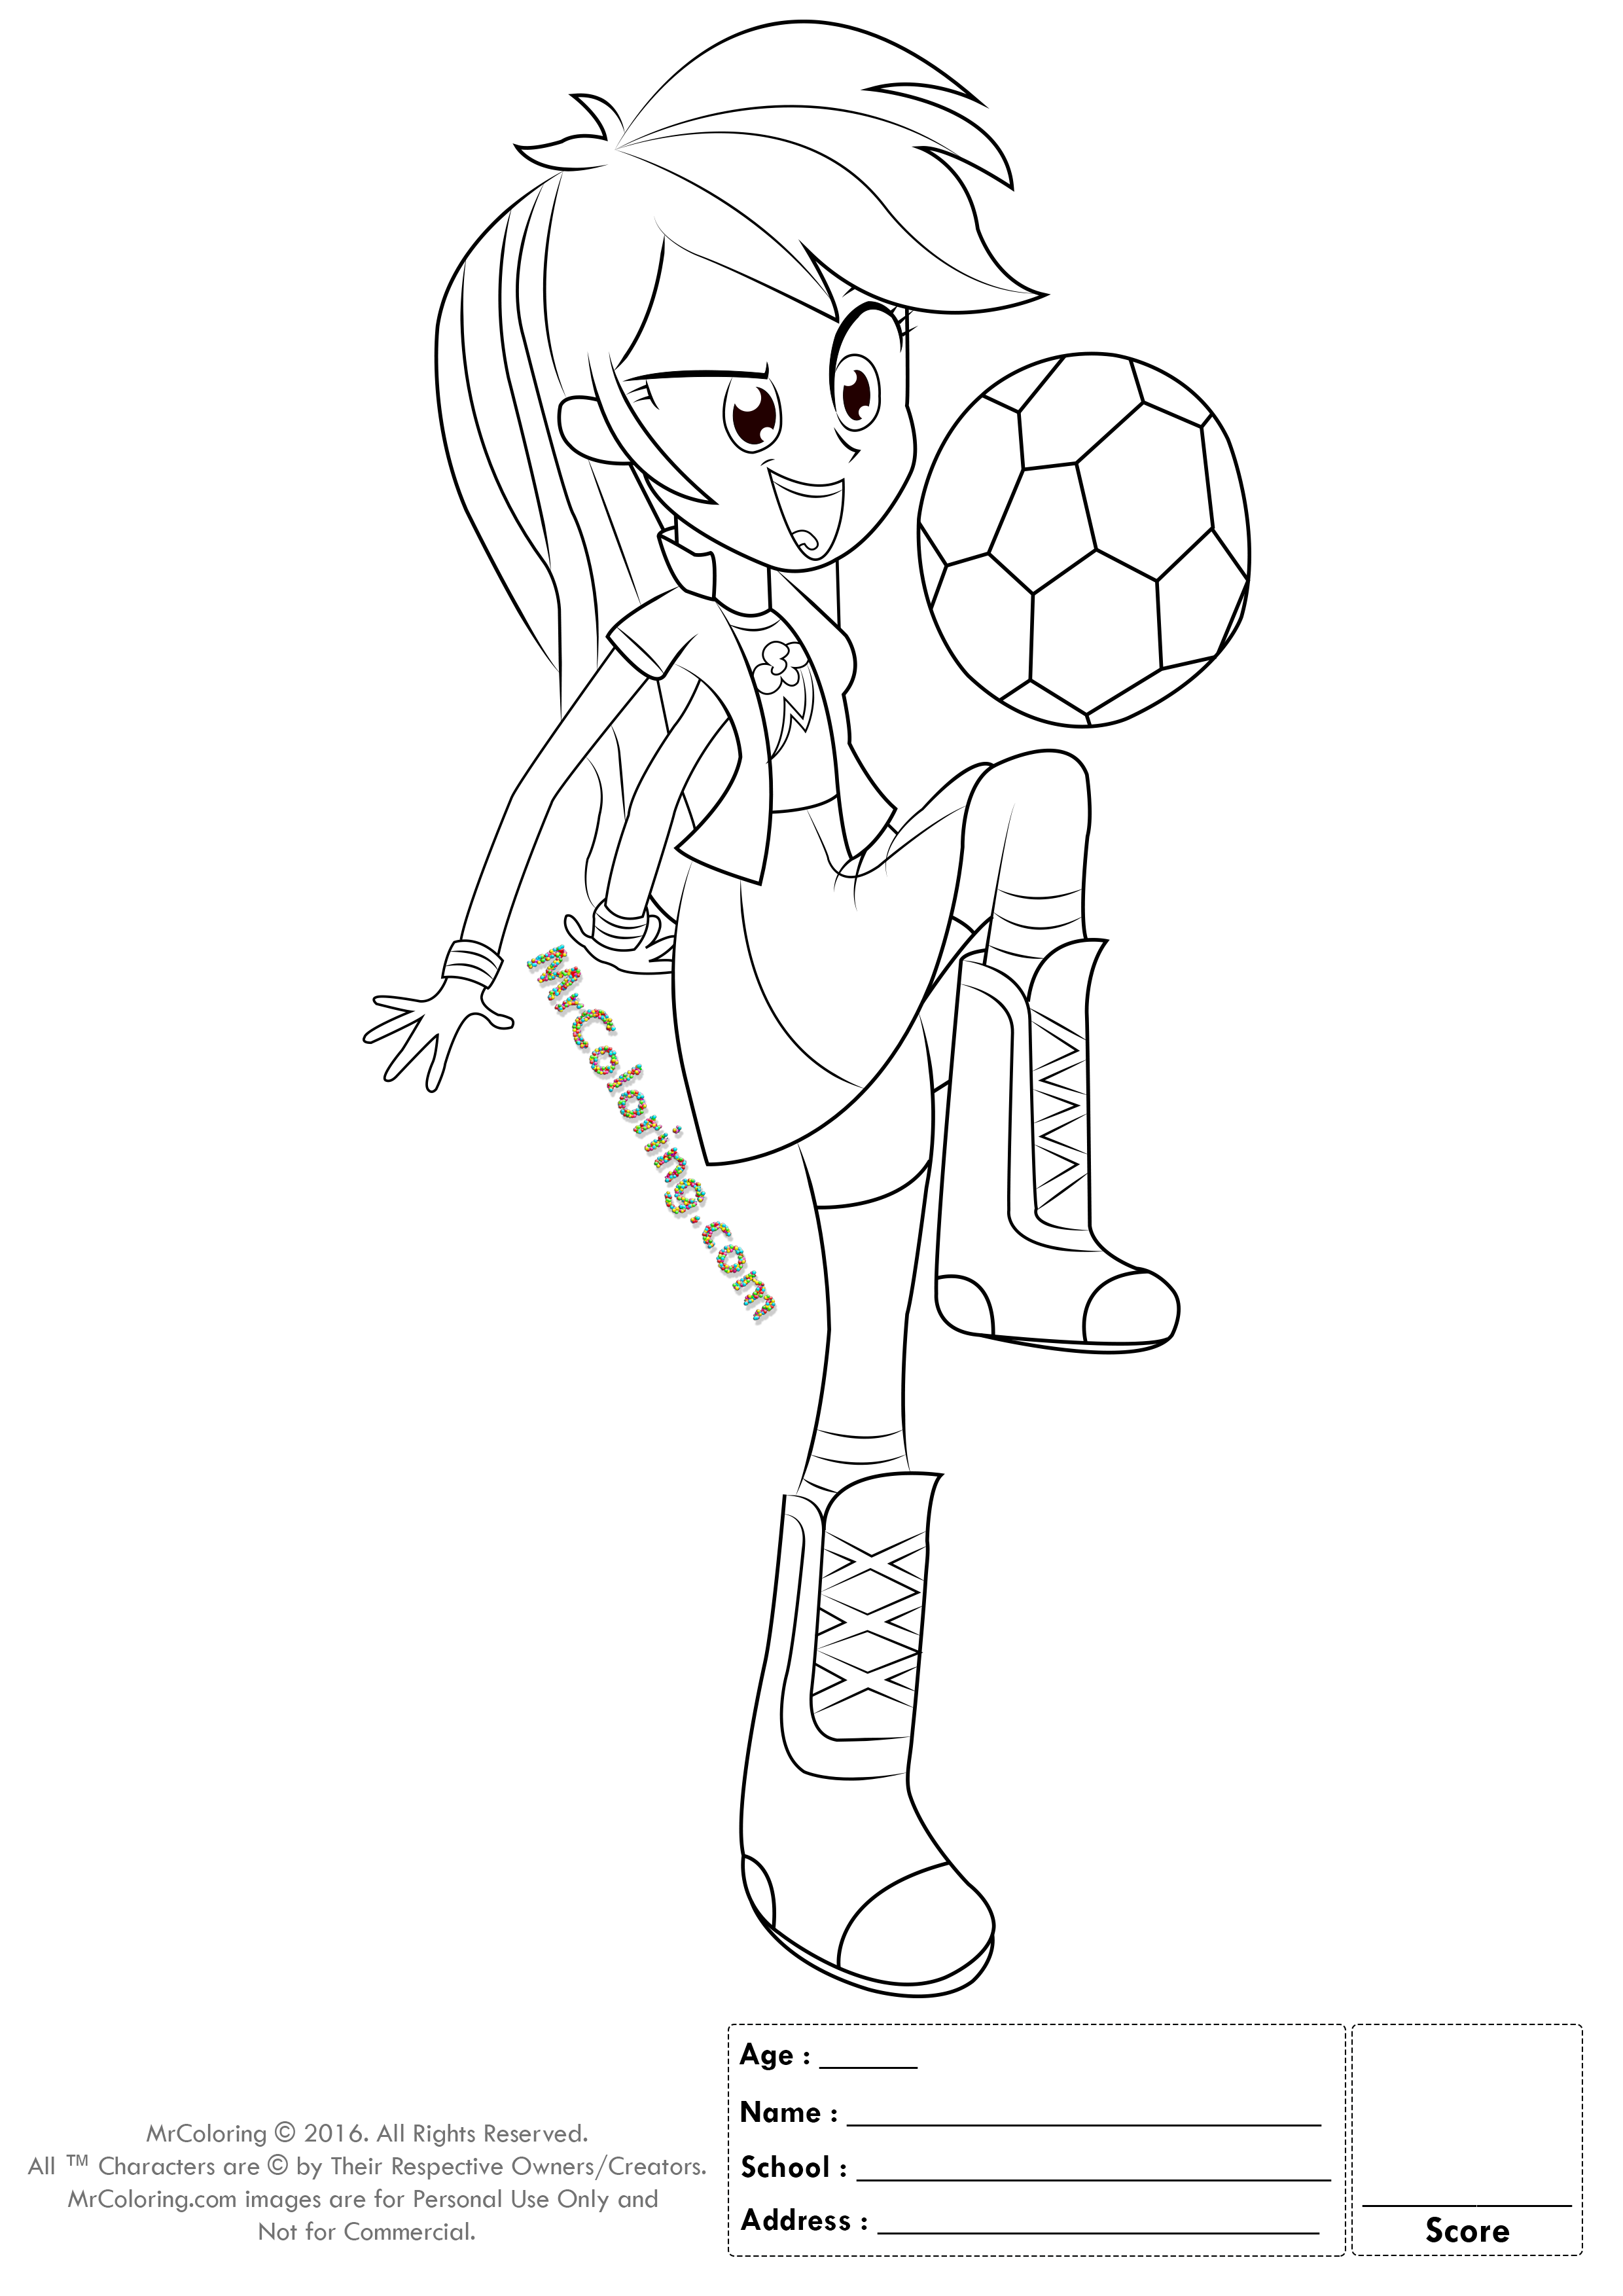 MLP Rainbow Dash Equestria Girls Coloring Pages - 4 | MrColoring.com